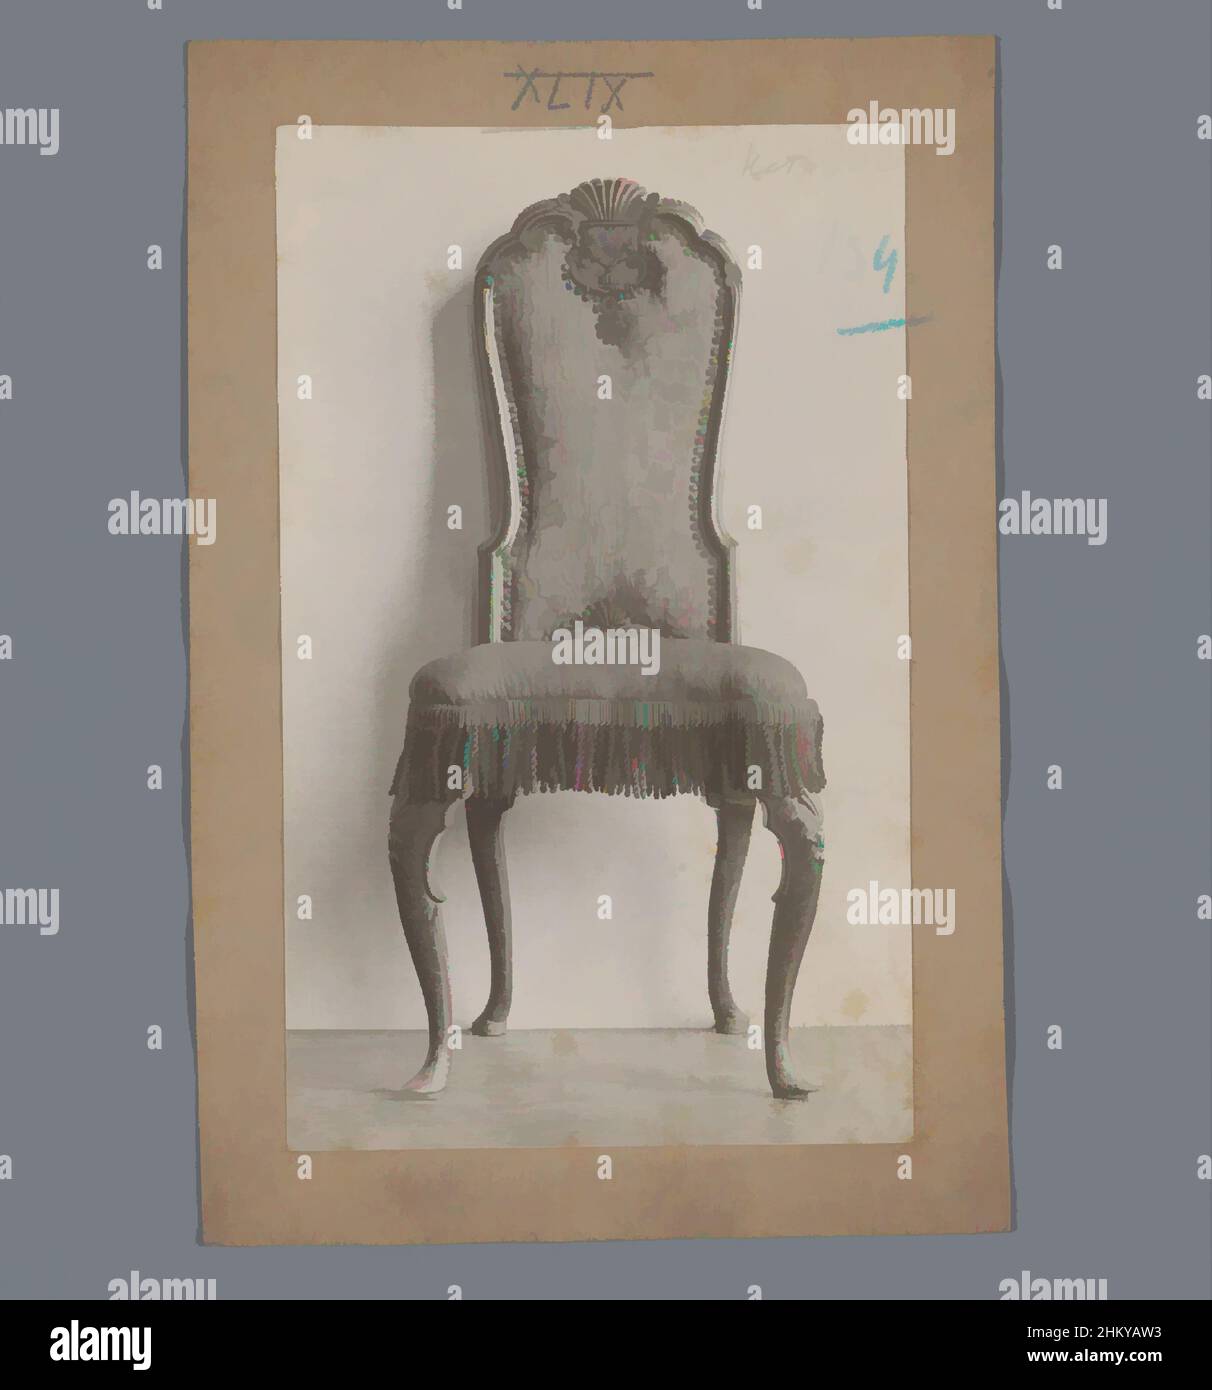 Art inspired by Chair decorated with a scallop on the back and fringes on the seat, c. 1875 - c. 1900, photographic support, height 153 mm × width 94 mm, Classic works modernized by Artotop with a splash of modernity. Shapes, color and value, eye-catching visual impact on art. Emotions through freedom of artworks in a contemporary way. A timeless message pursuing a wildly creative new direction. Artists turning to the digital medium and creating the Artotop NFT Stock Photo